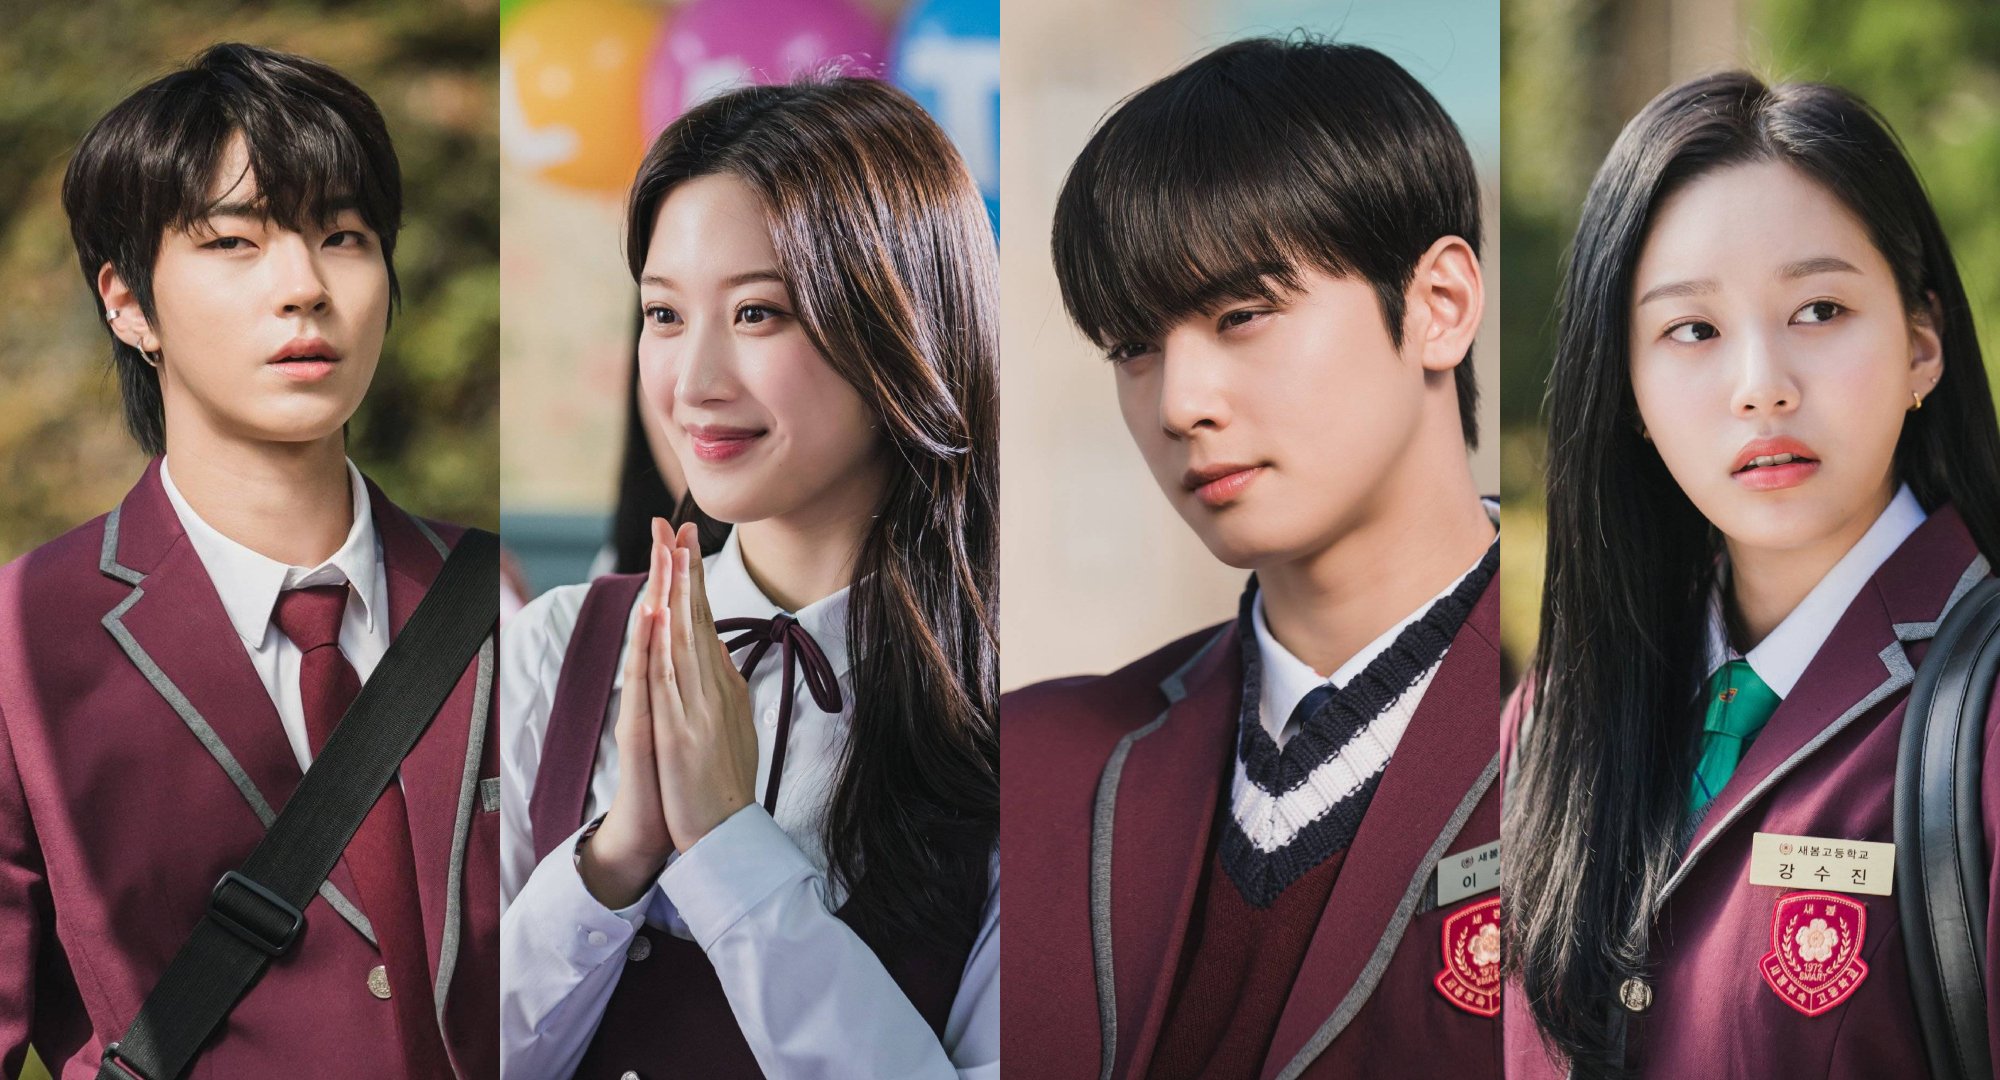 Hwang In-youp, Moon Ga-young, Cha Eun-woo and Park Yoon-a for 'True Beauty' cast.